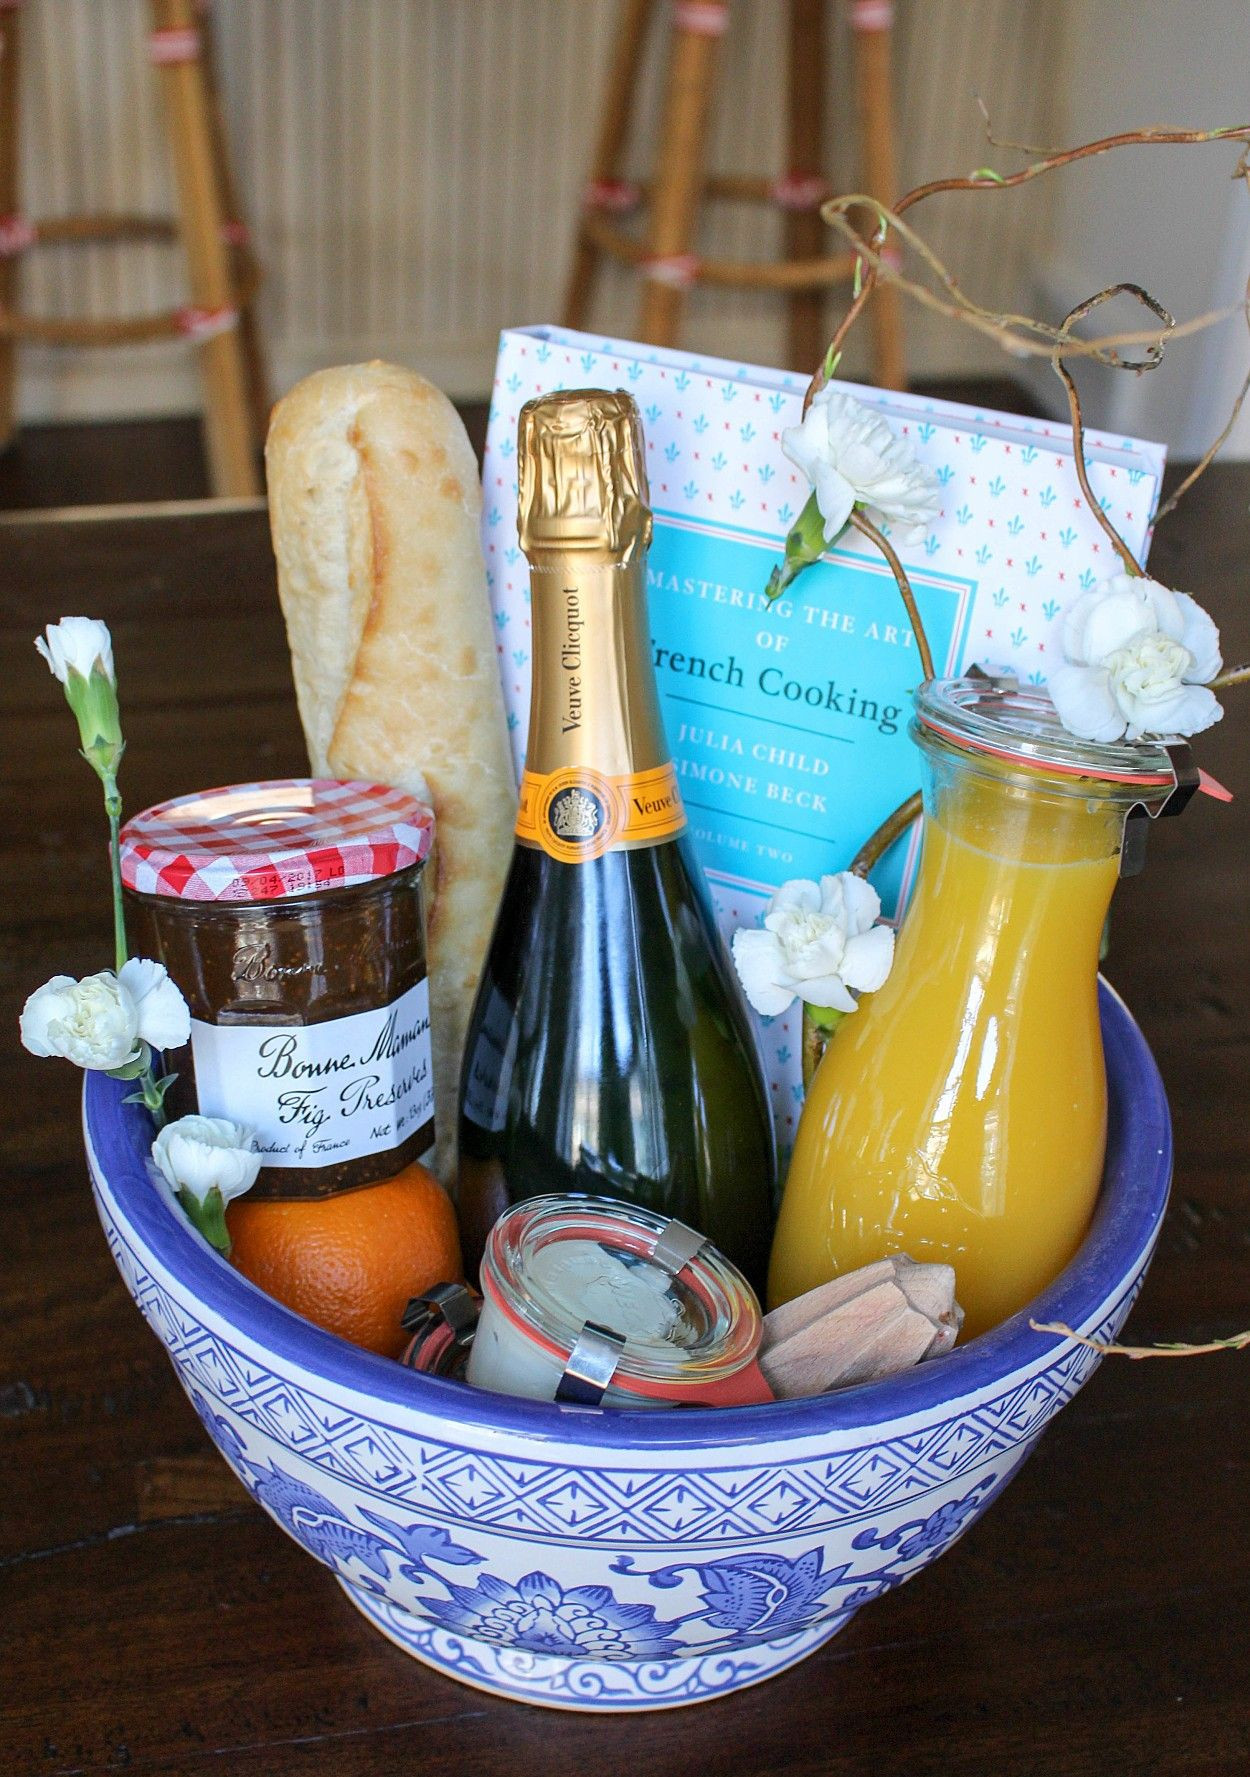 Hostess Gift Ideas For Christmas Dinner Party
 An Edible Gift Basket Inspired by the Beauty of Provence